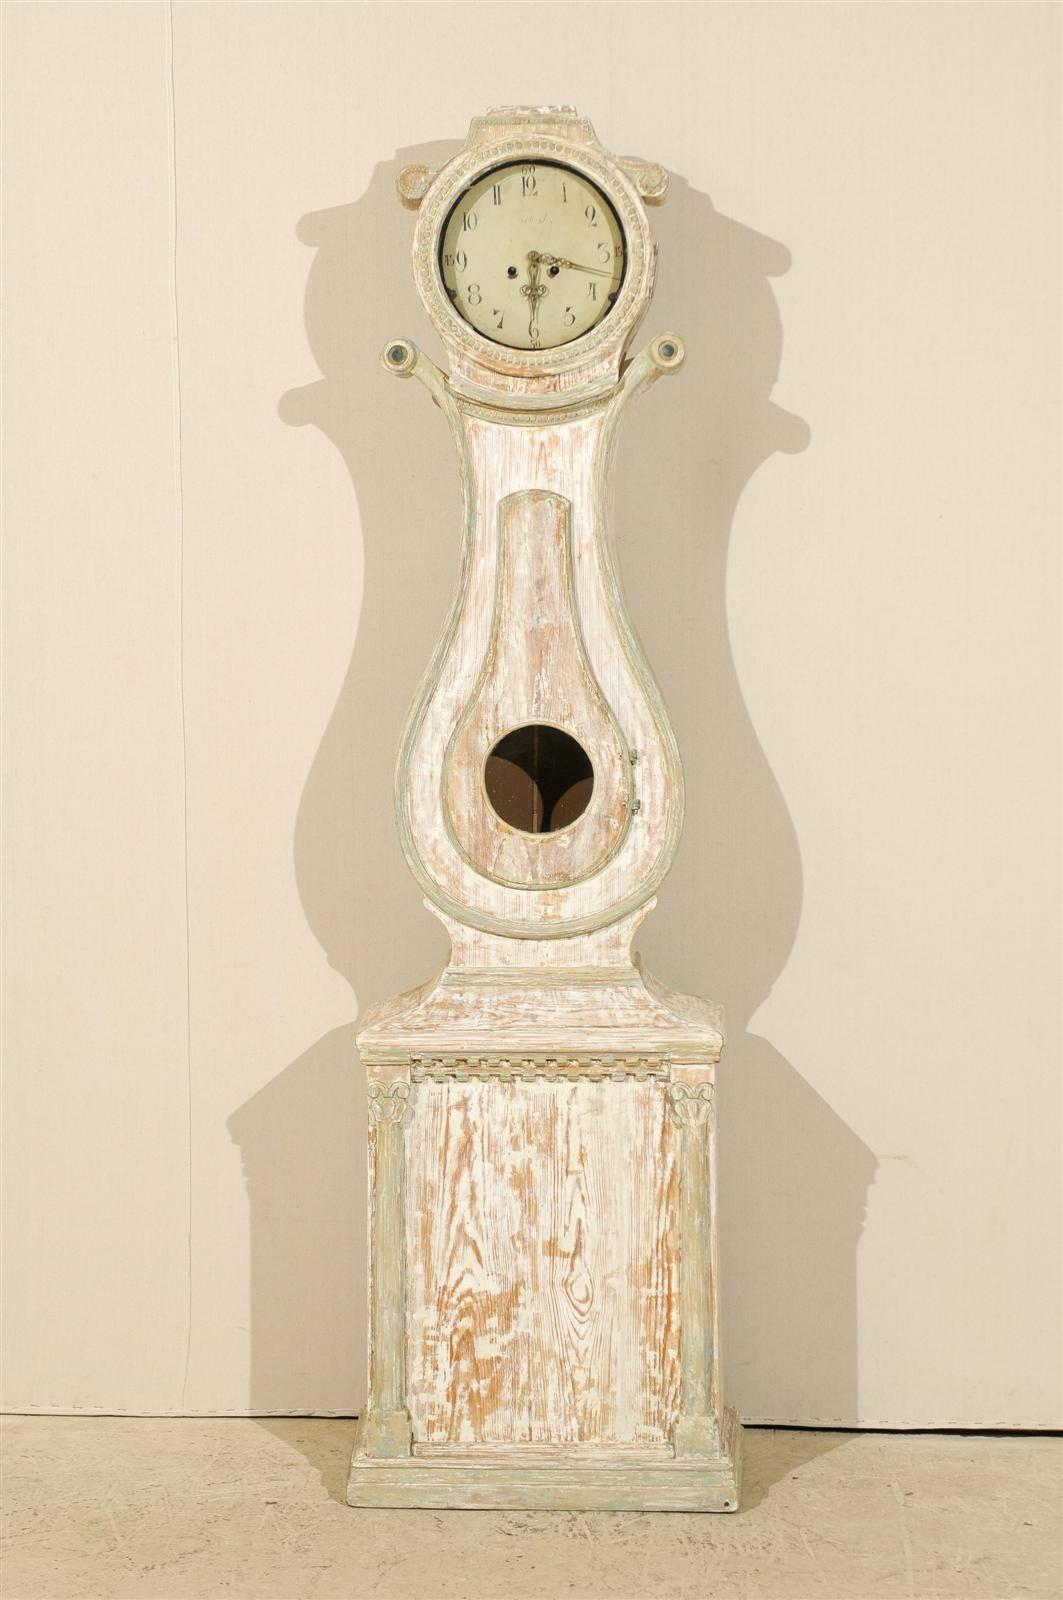 A Swedish 19th century painted wood clock with volutes on both side of the head. This clock features a lyre-shaped body and rectangular base flanked by two stylized Corinthian columns. This clock retains it's original metal face, hands and movement.